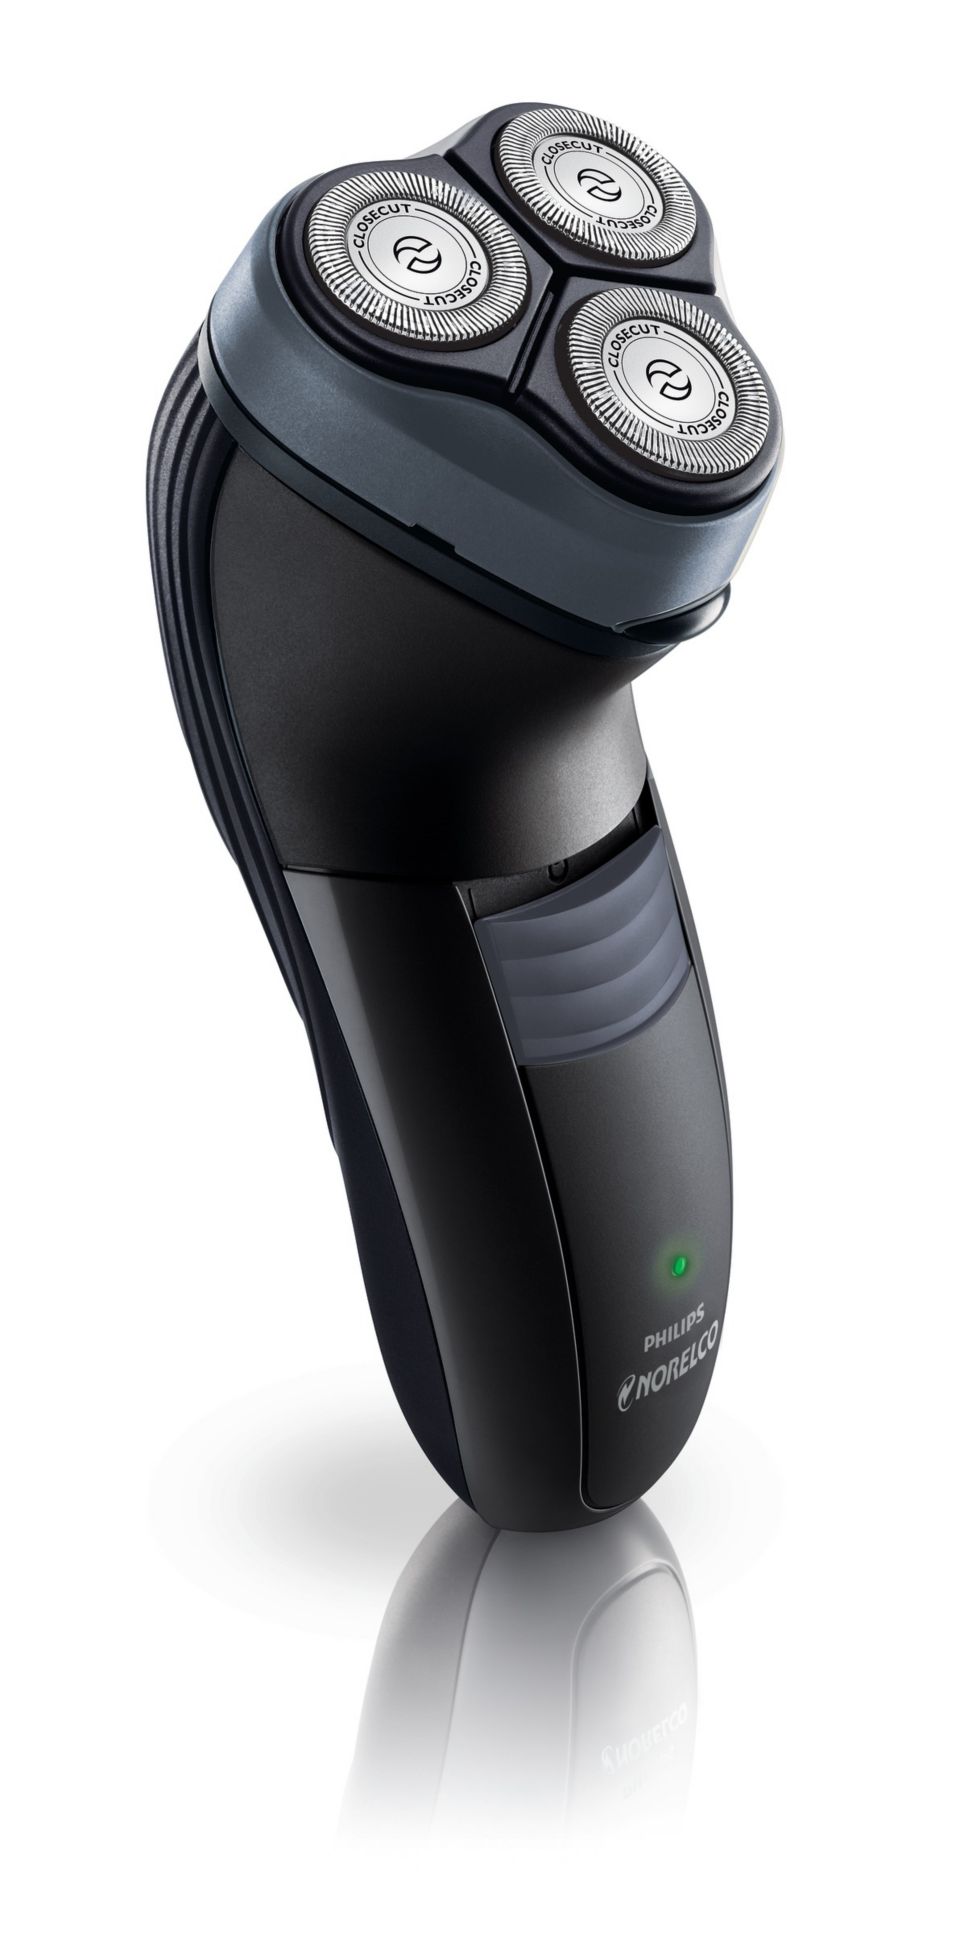 Shaver 2100 Dry electric shaver, Series 2000 6945XL/41 | Norelco